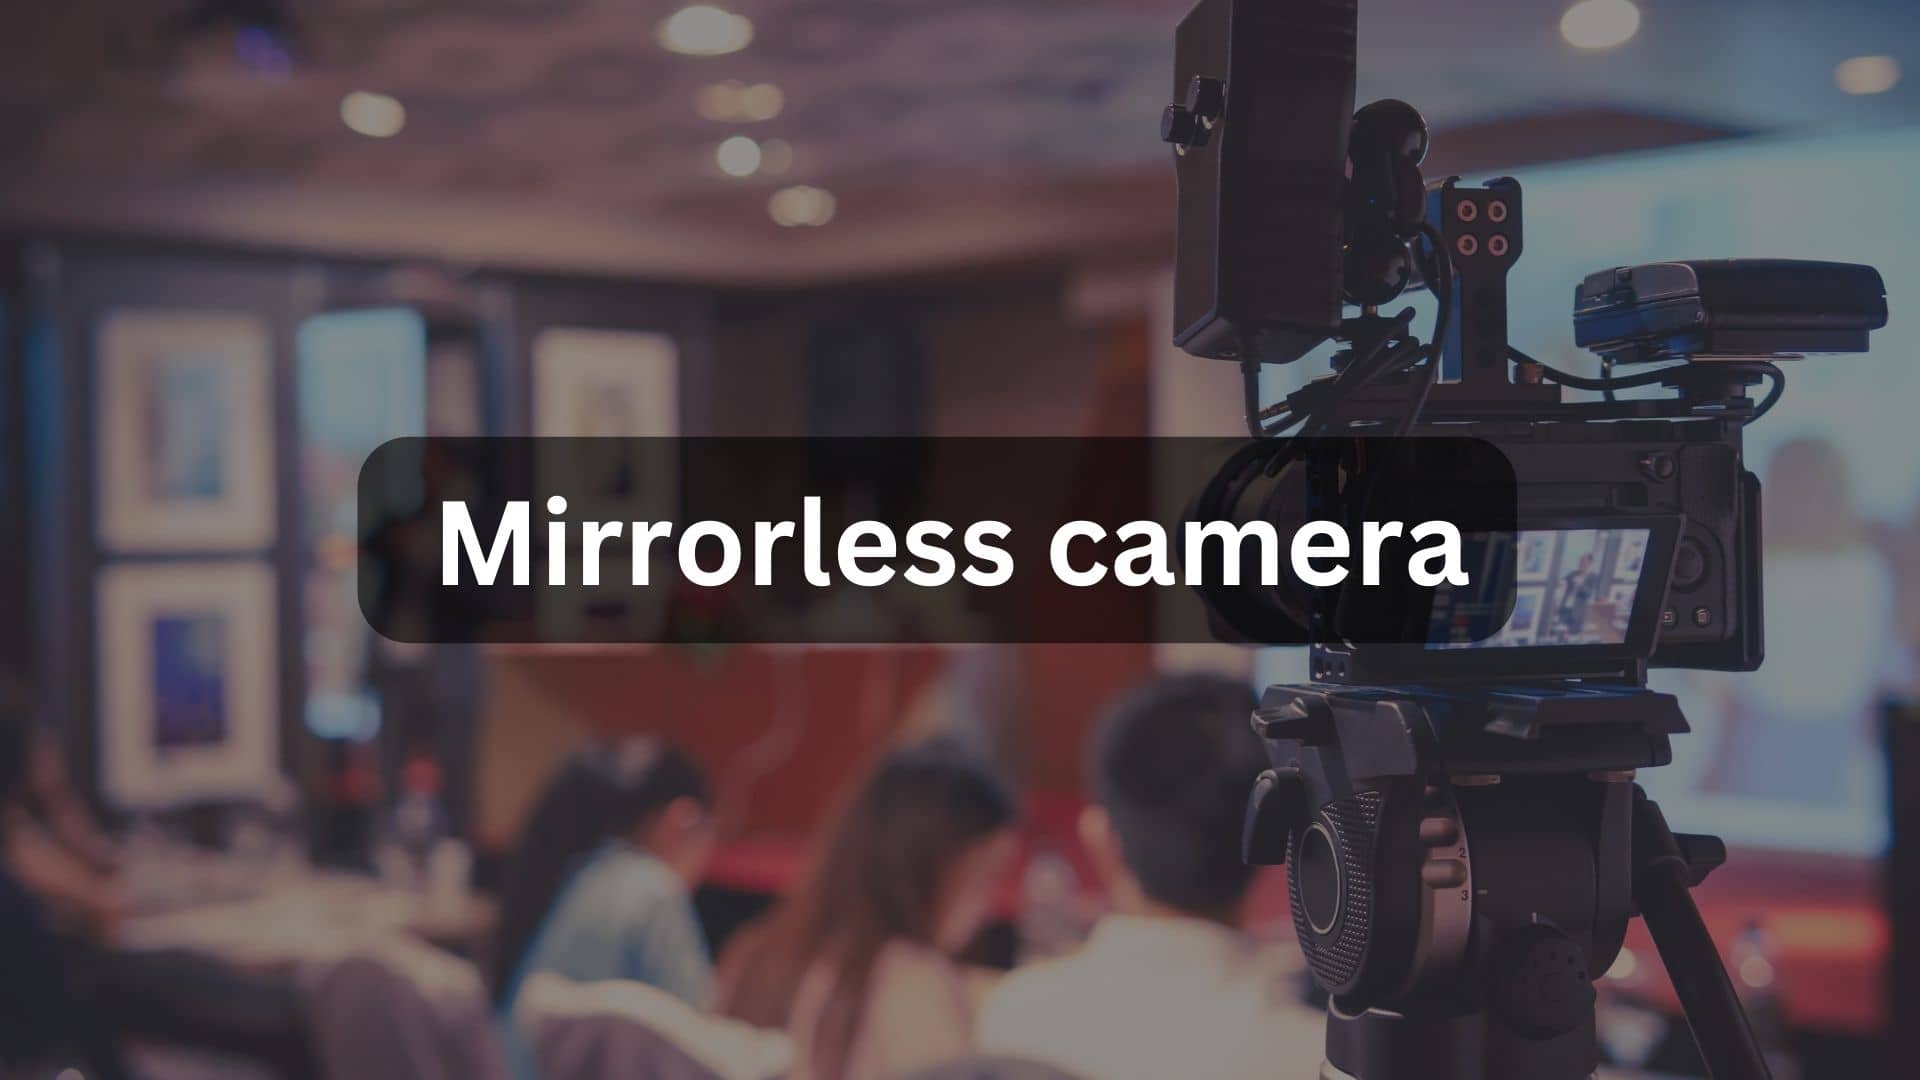 Things to know before buying a mirrorless camera